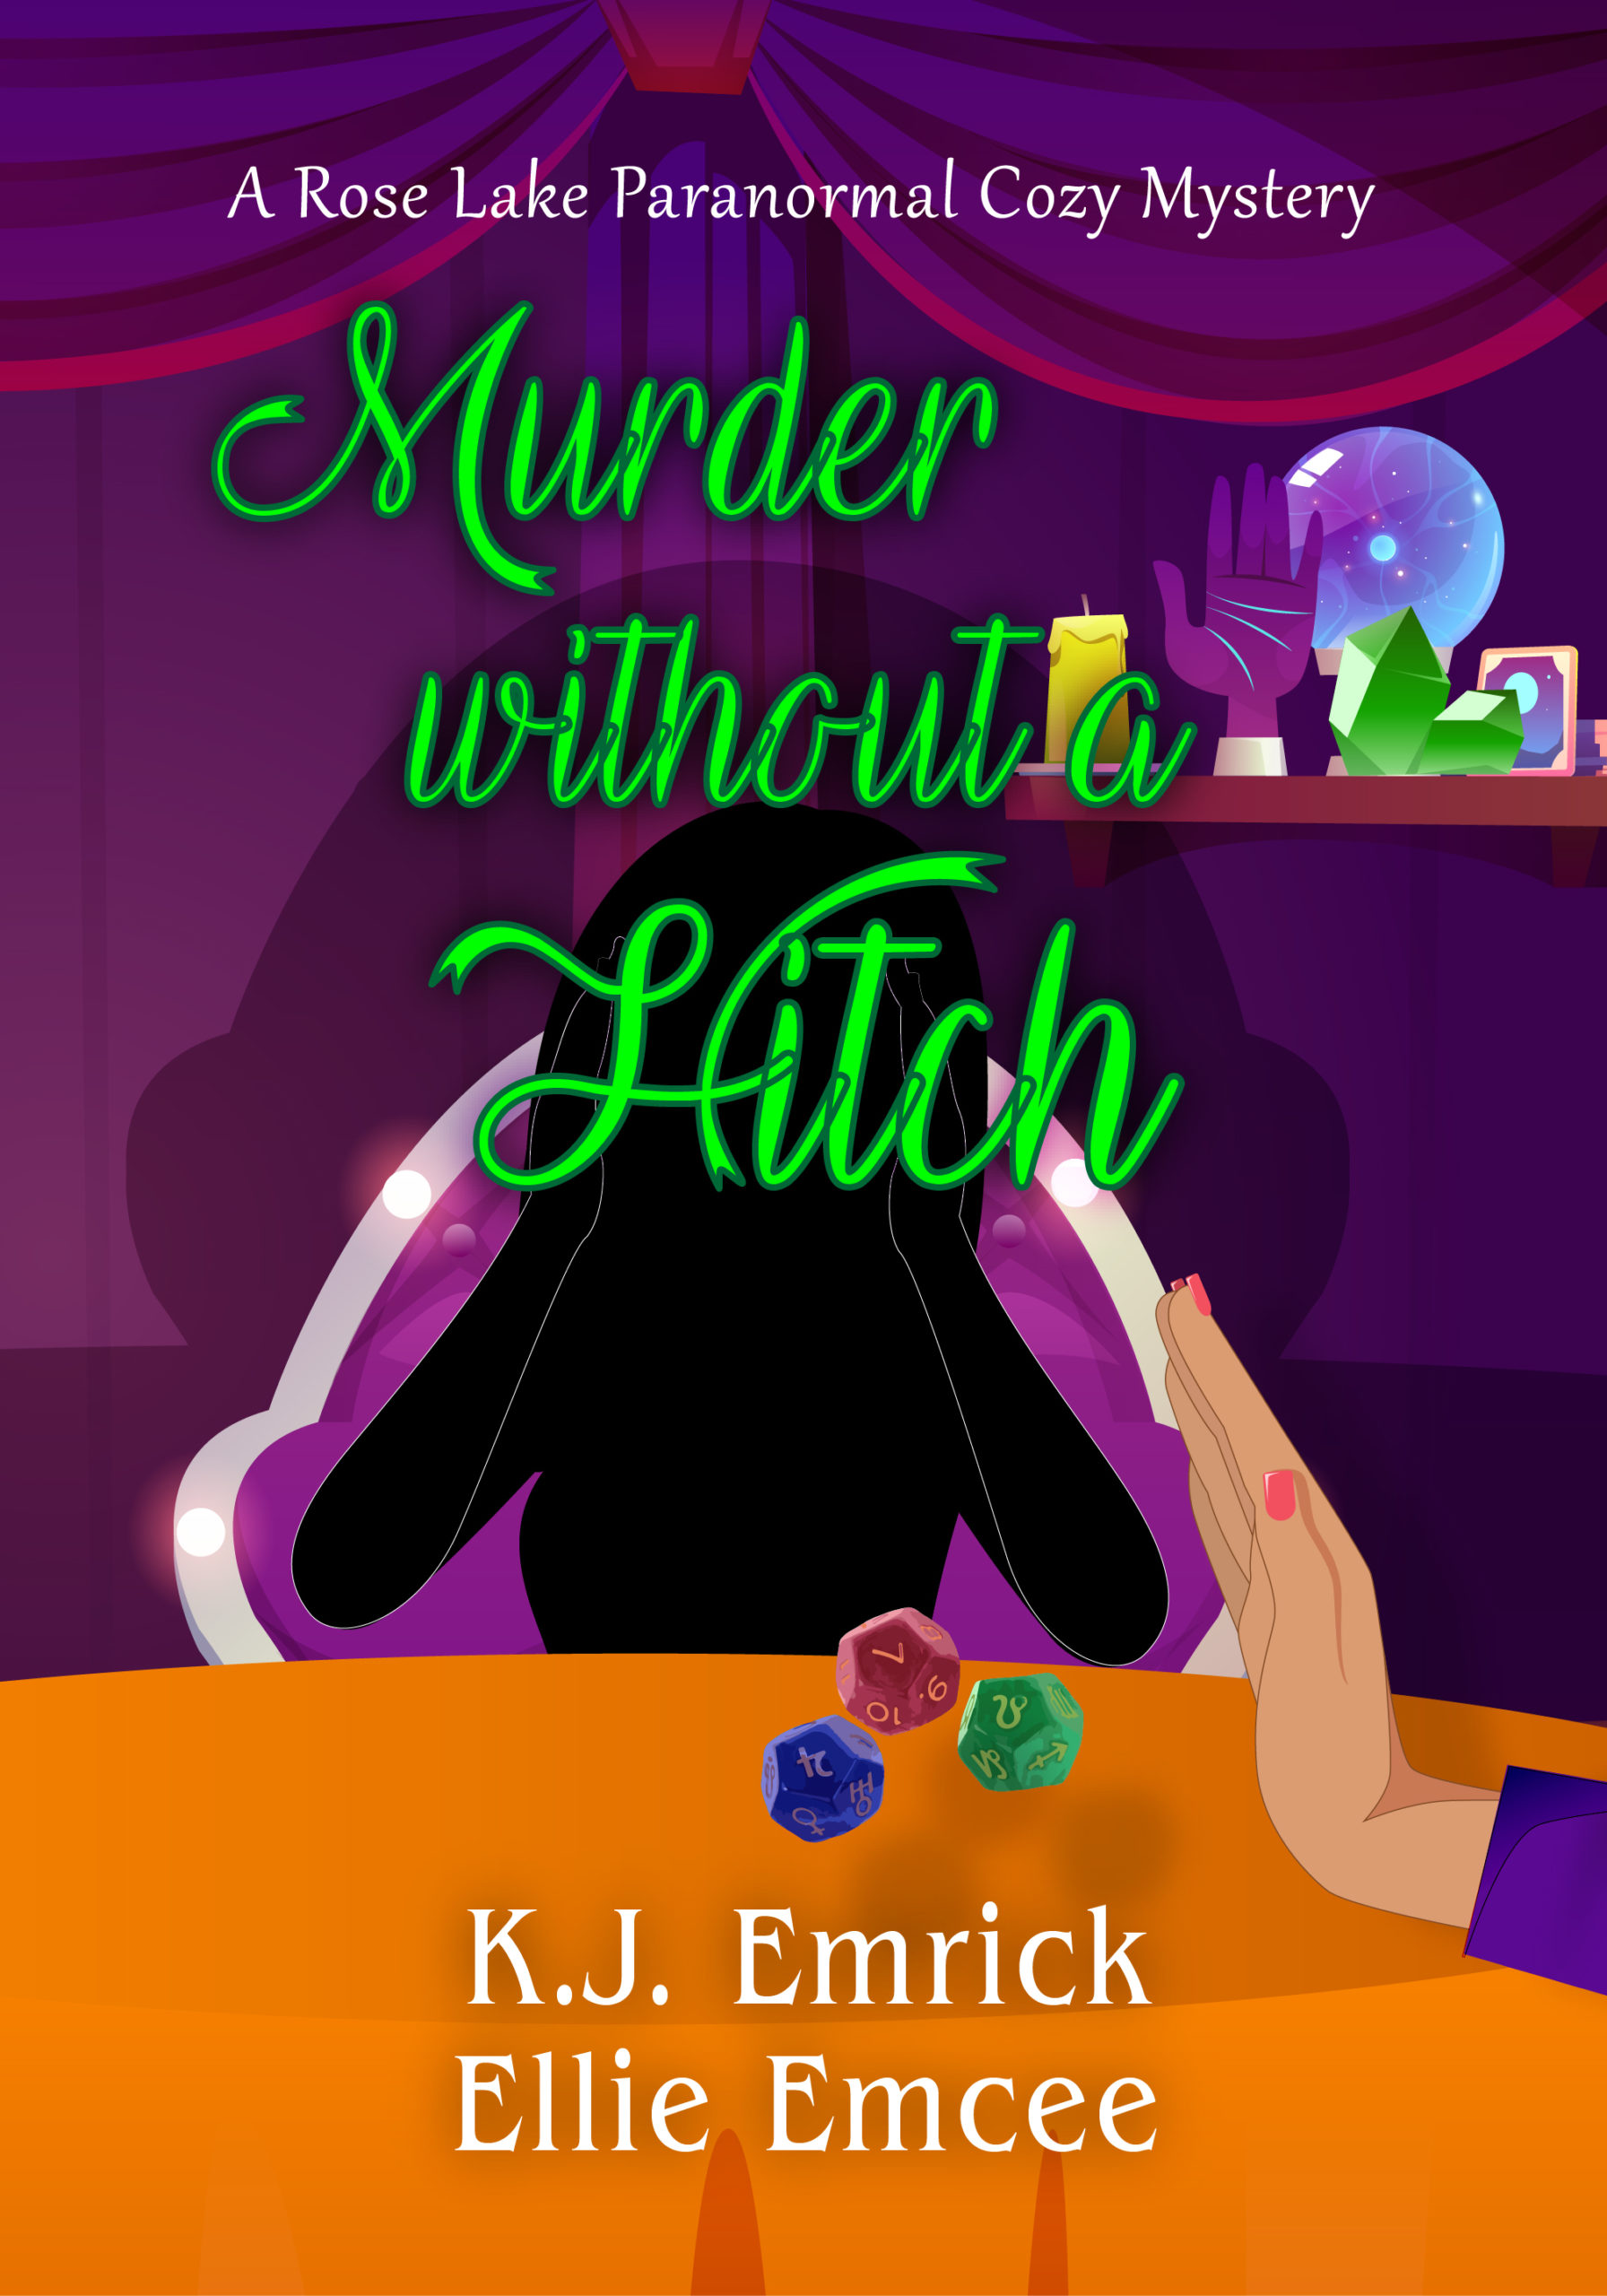 Murder Without a Hitch – A Rose Lake Paranormal Cozy Mystery Book 3